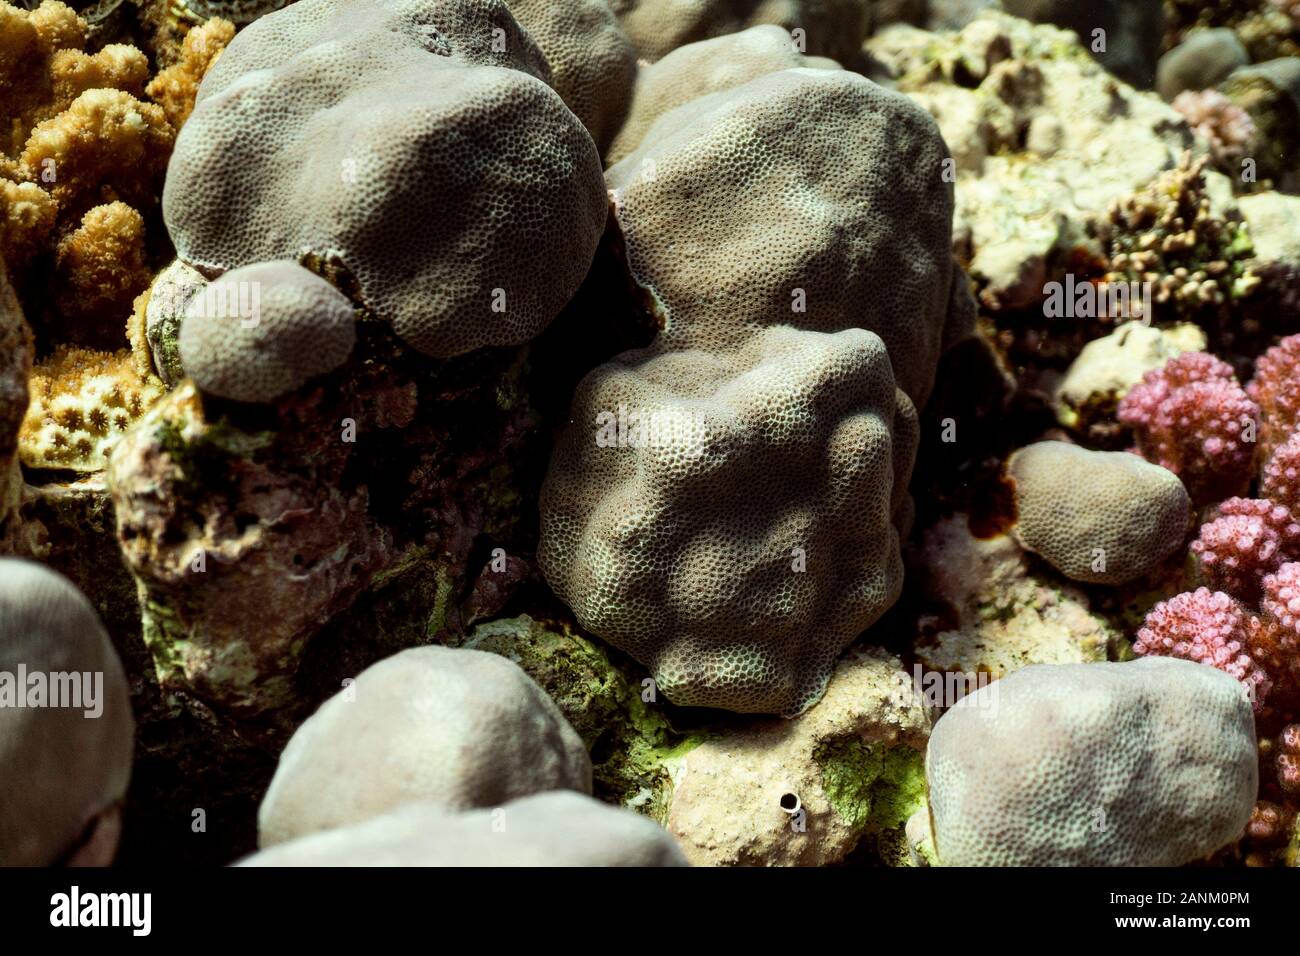 Coral reef close up, coral reef macro photography, underwater coral reef texture, ocean nature close up Stock Photo